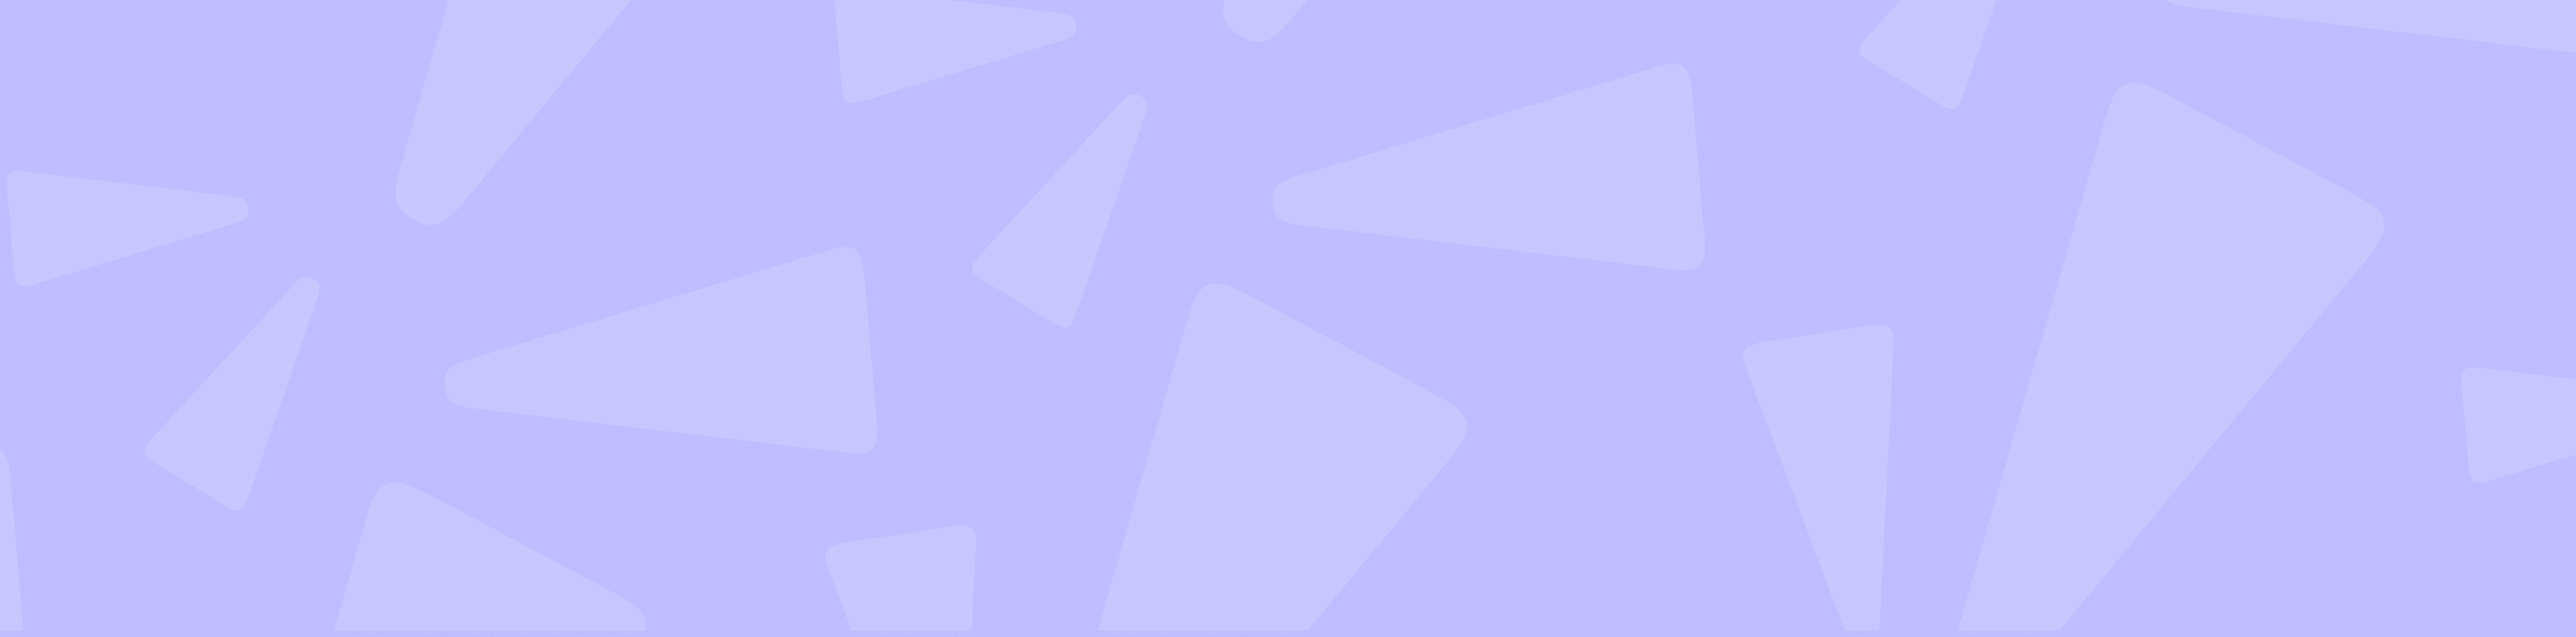 Purple background with white triangles